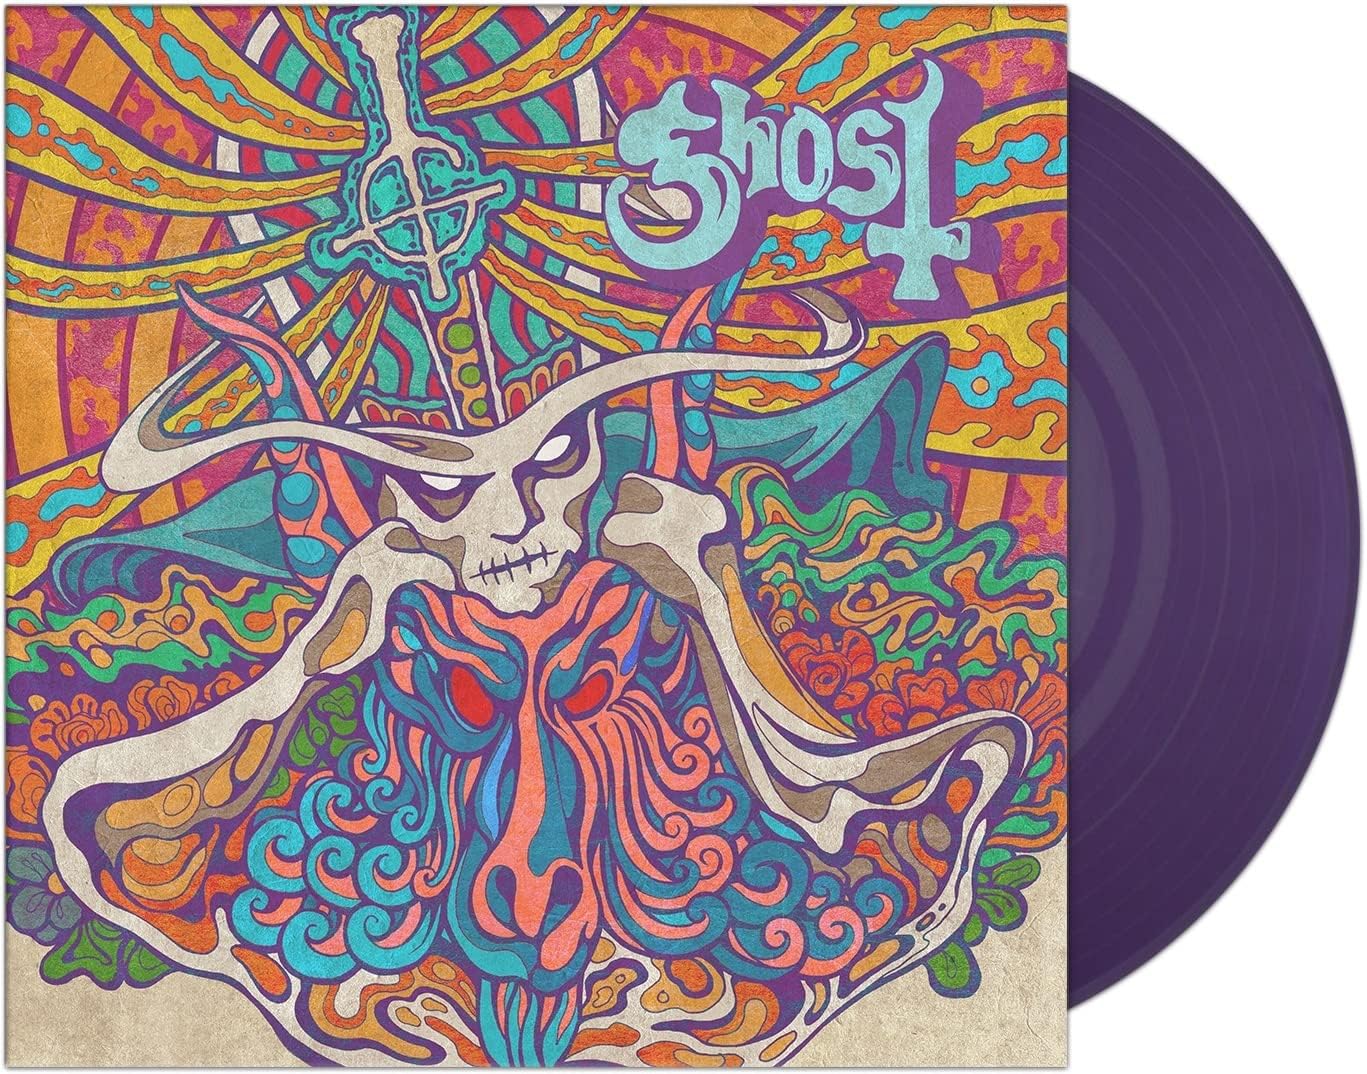 Ghost Seven Inches Of Satanic Panic Limited Purple 7" Single